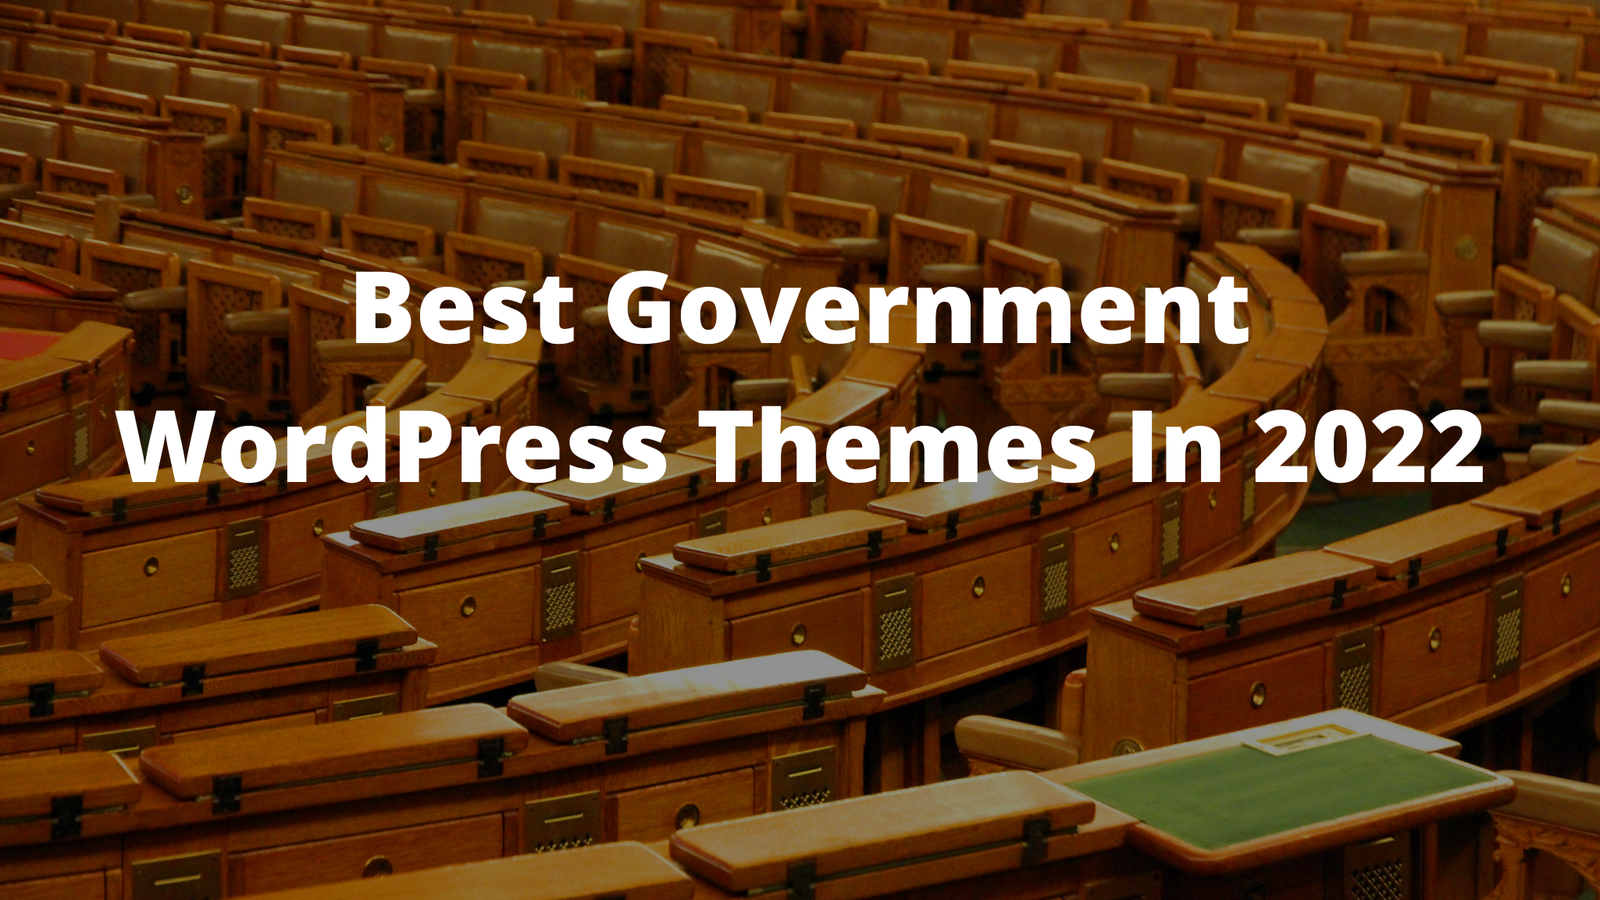 Best Government WordPress Themes In 2022